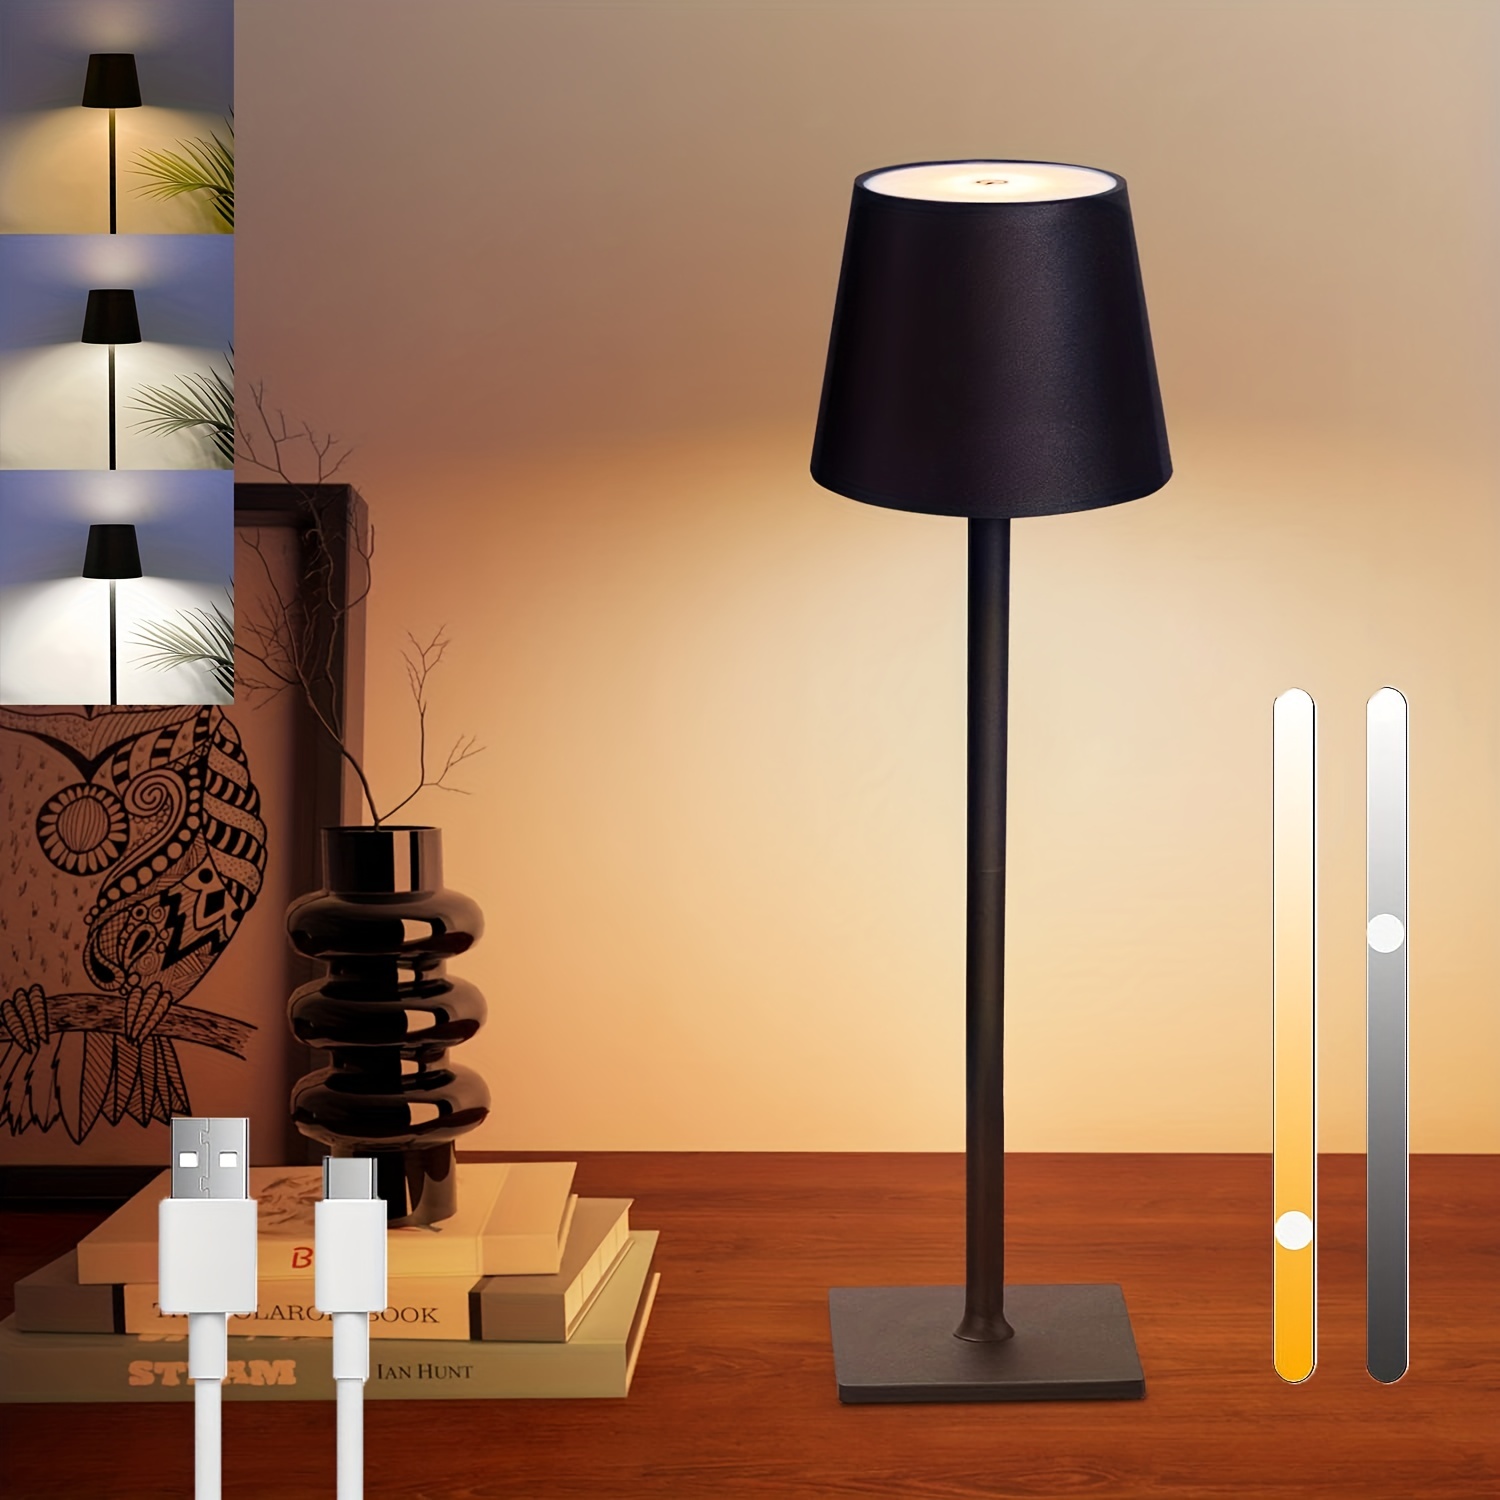 Restaurant Table Lamps Battery Operated